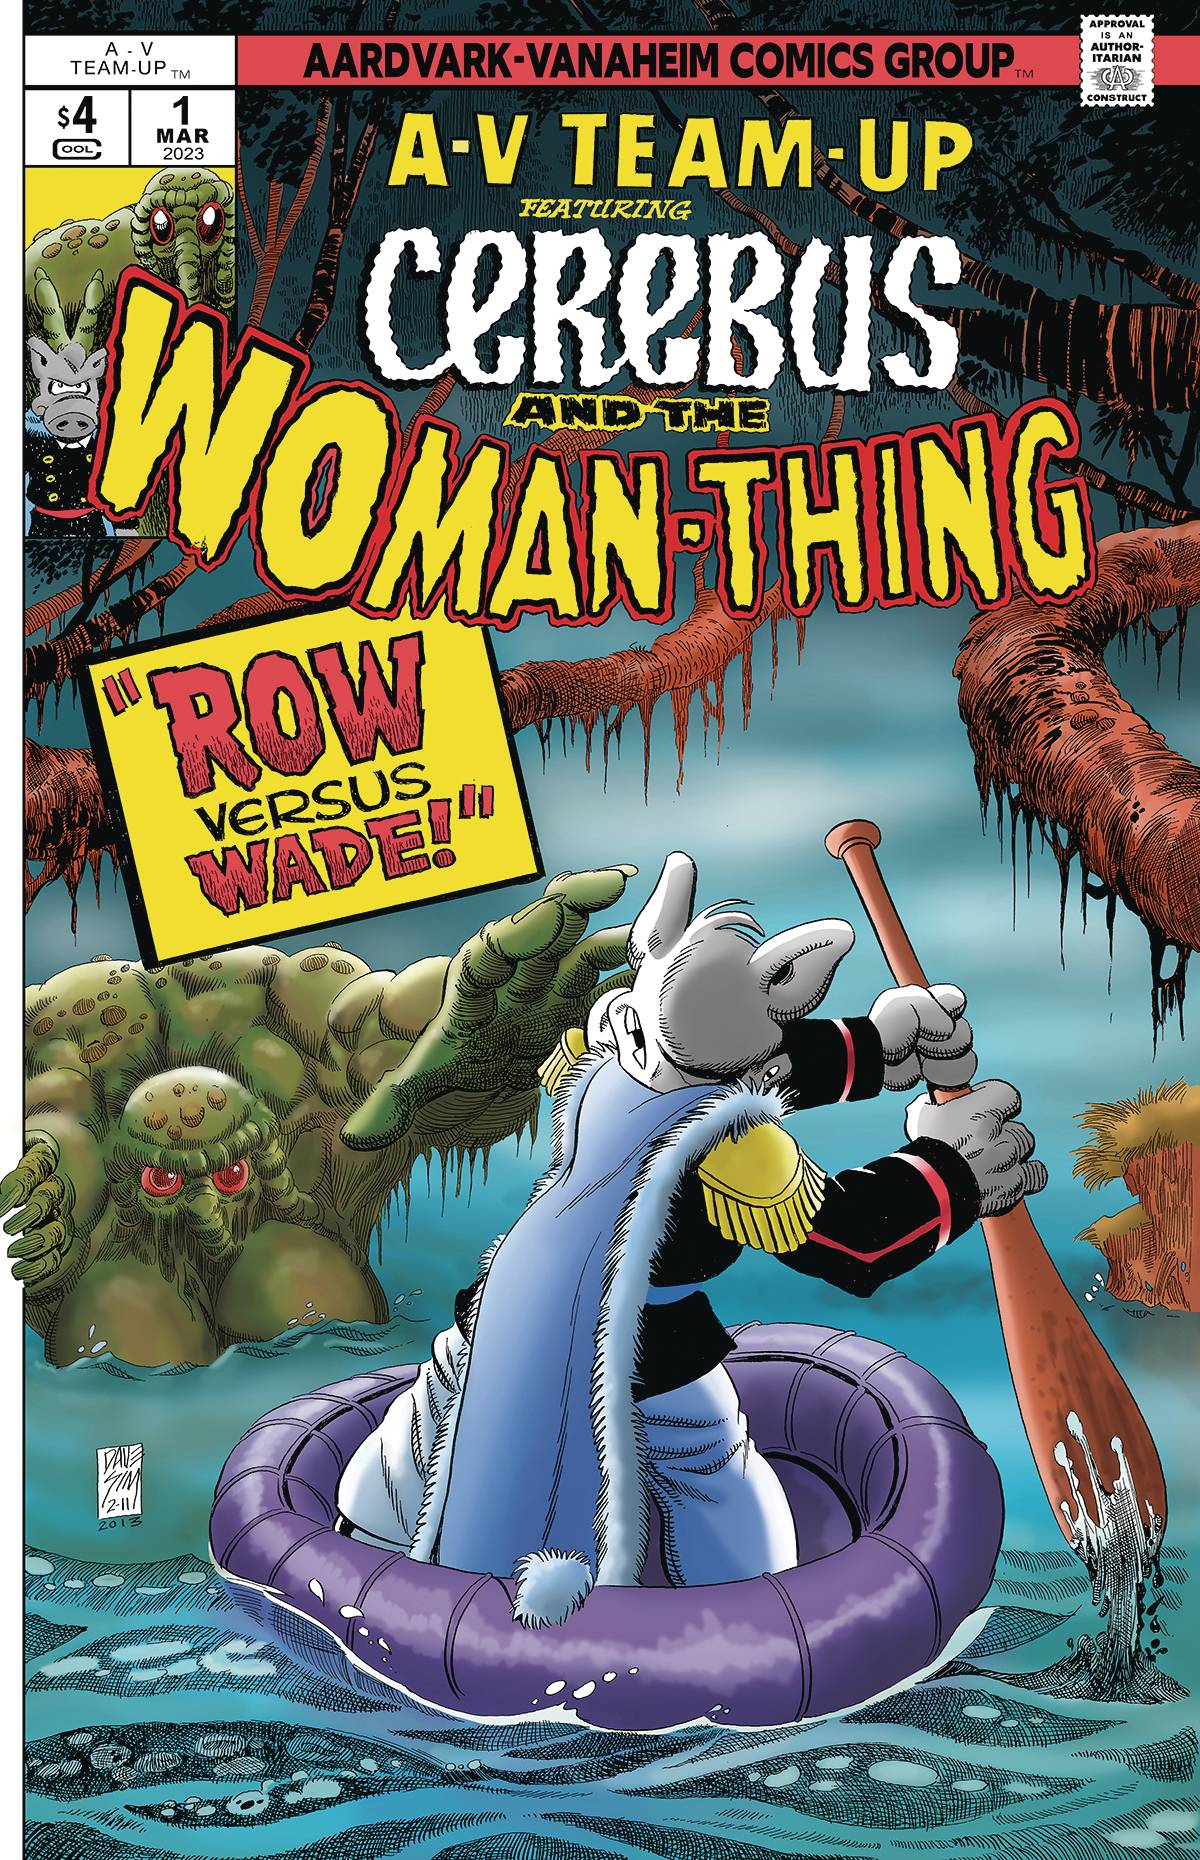 AV TEAM UP CEREBUS & WOMAN THING ONE SHOT SGN ED